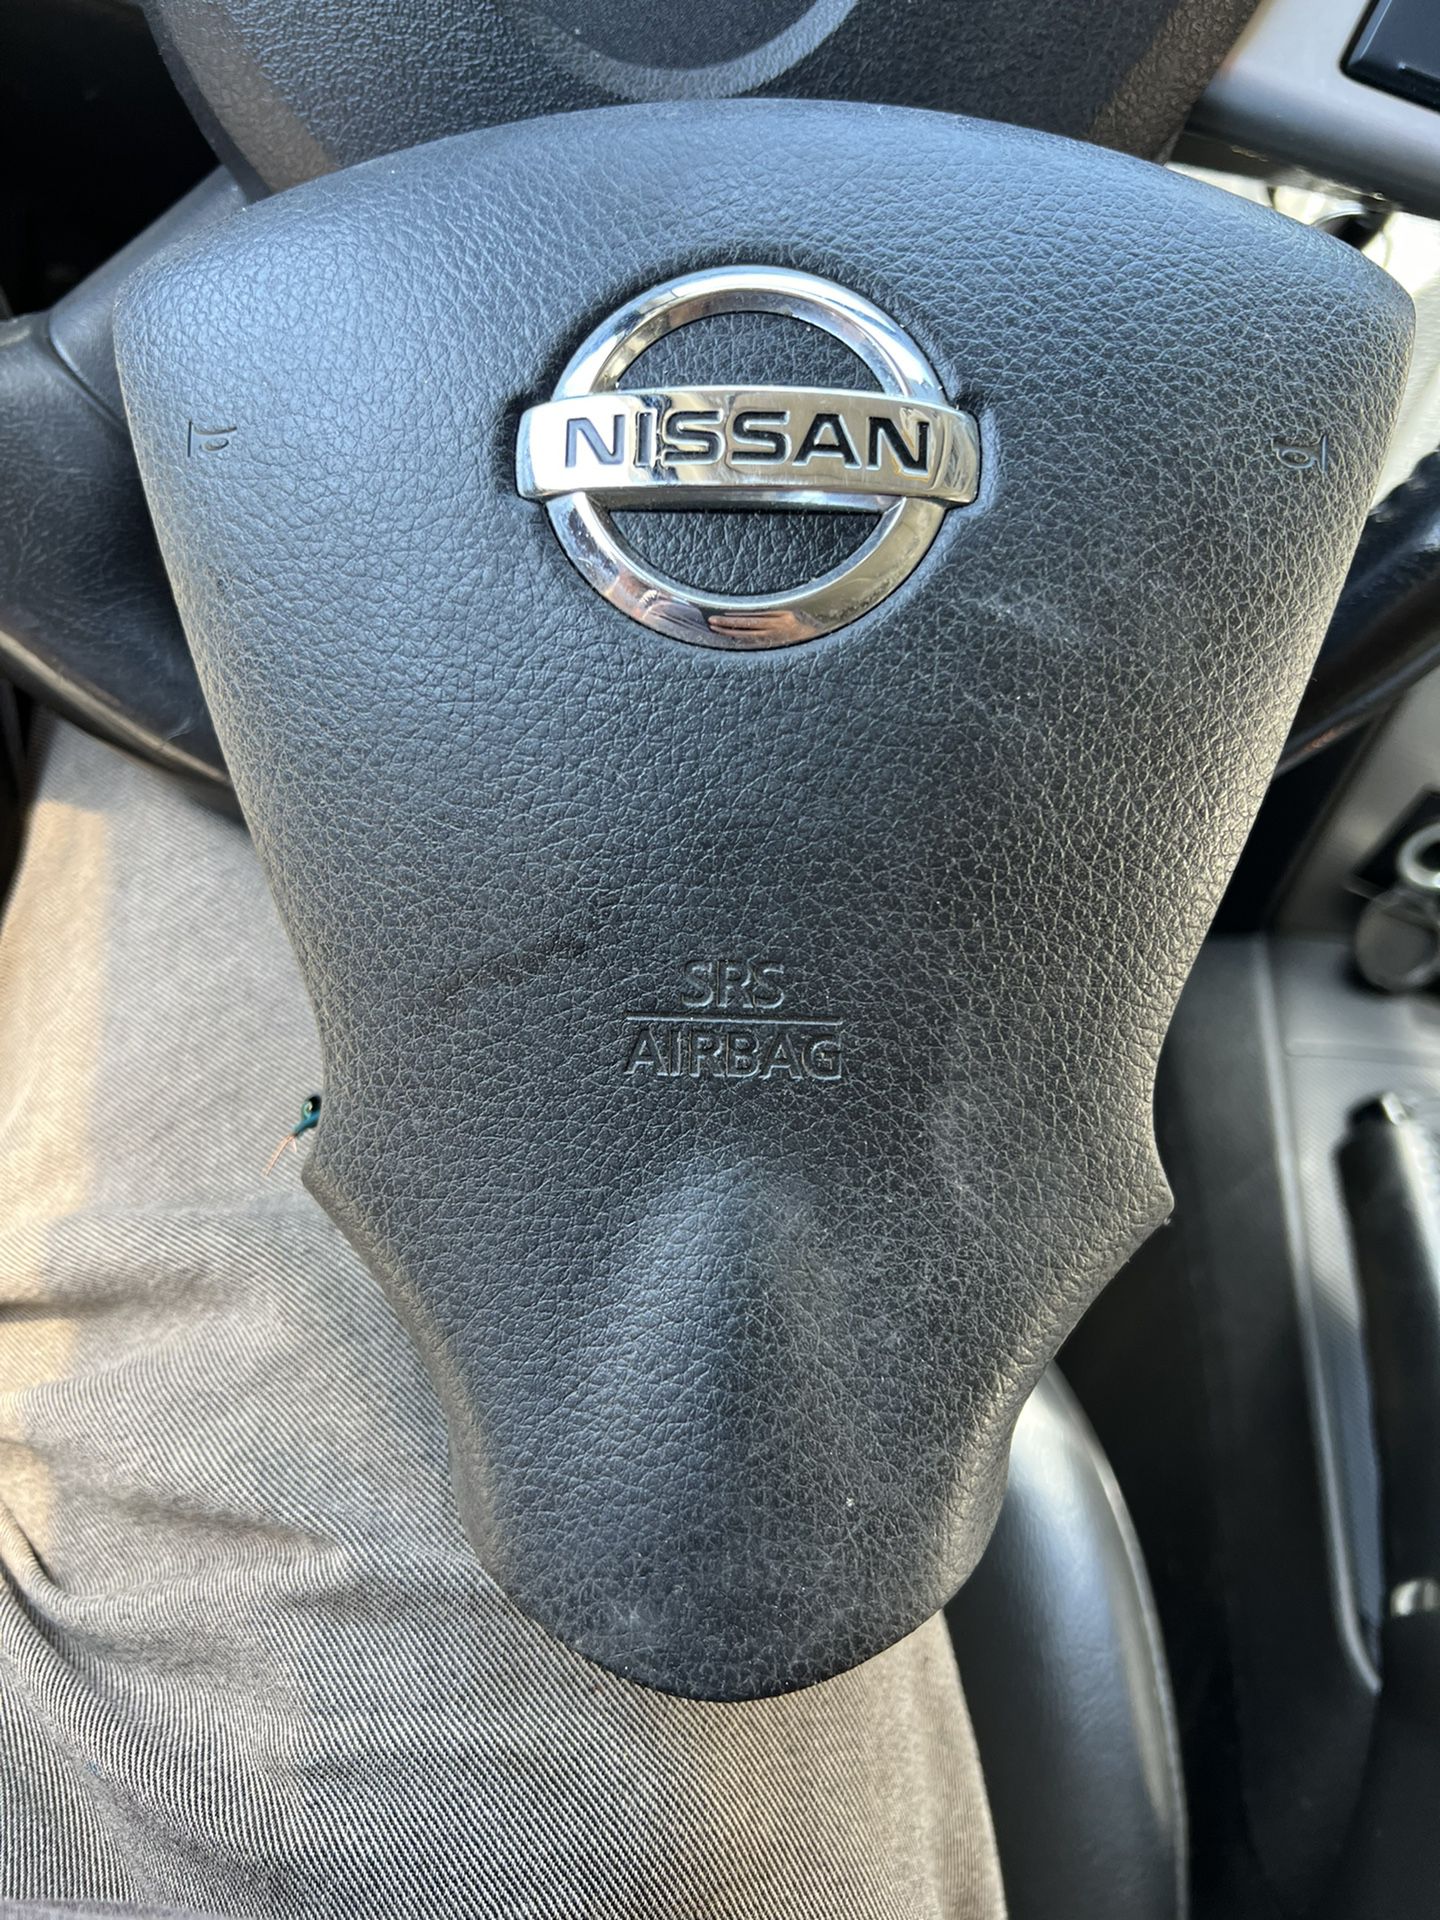 Nissan. From Steering Wheel. NISSAN NV(contact info removed)-2021